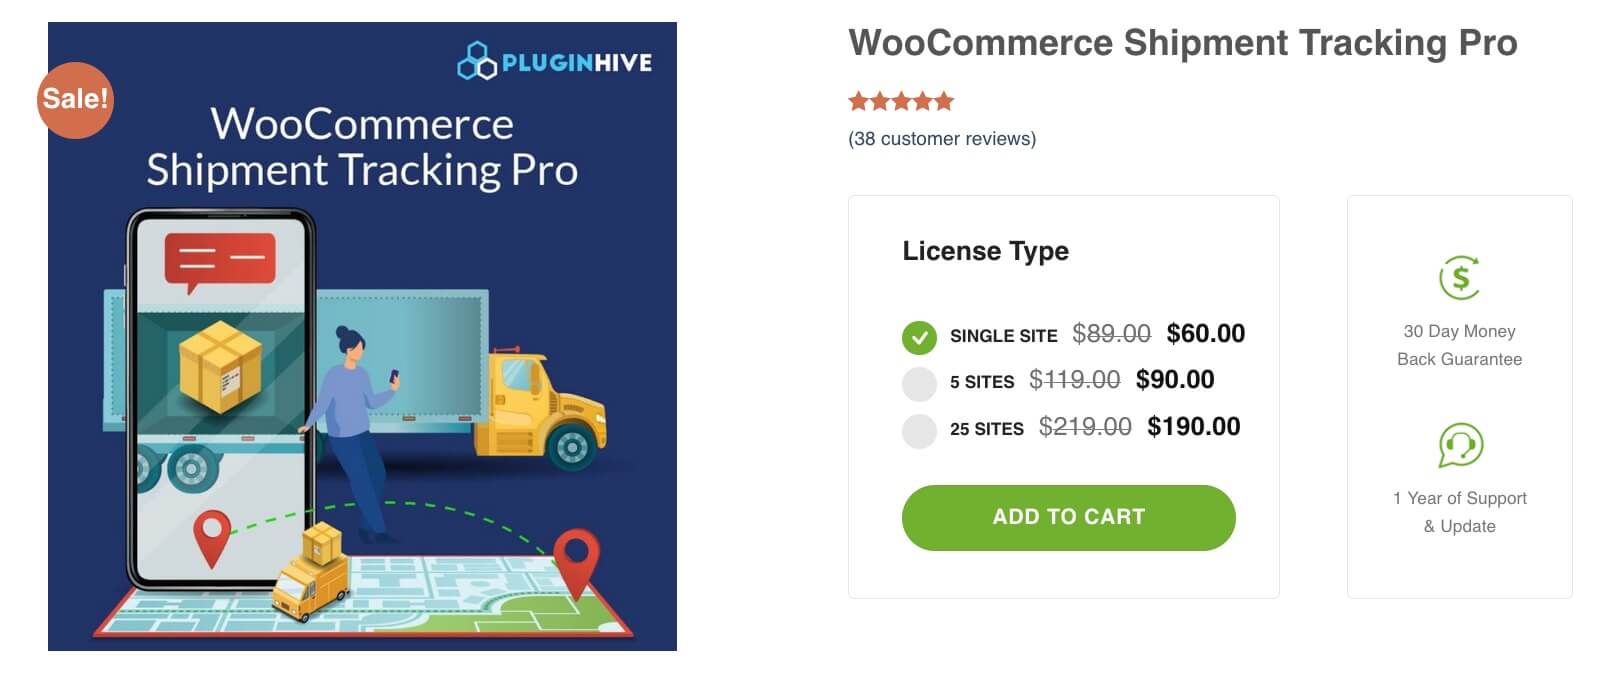 WooCommerce Shipment Tracking Pro by pluginhive